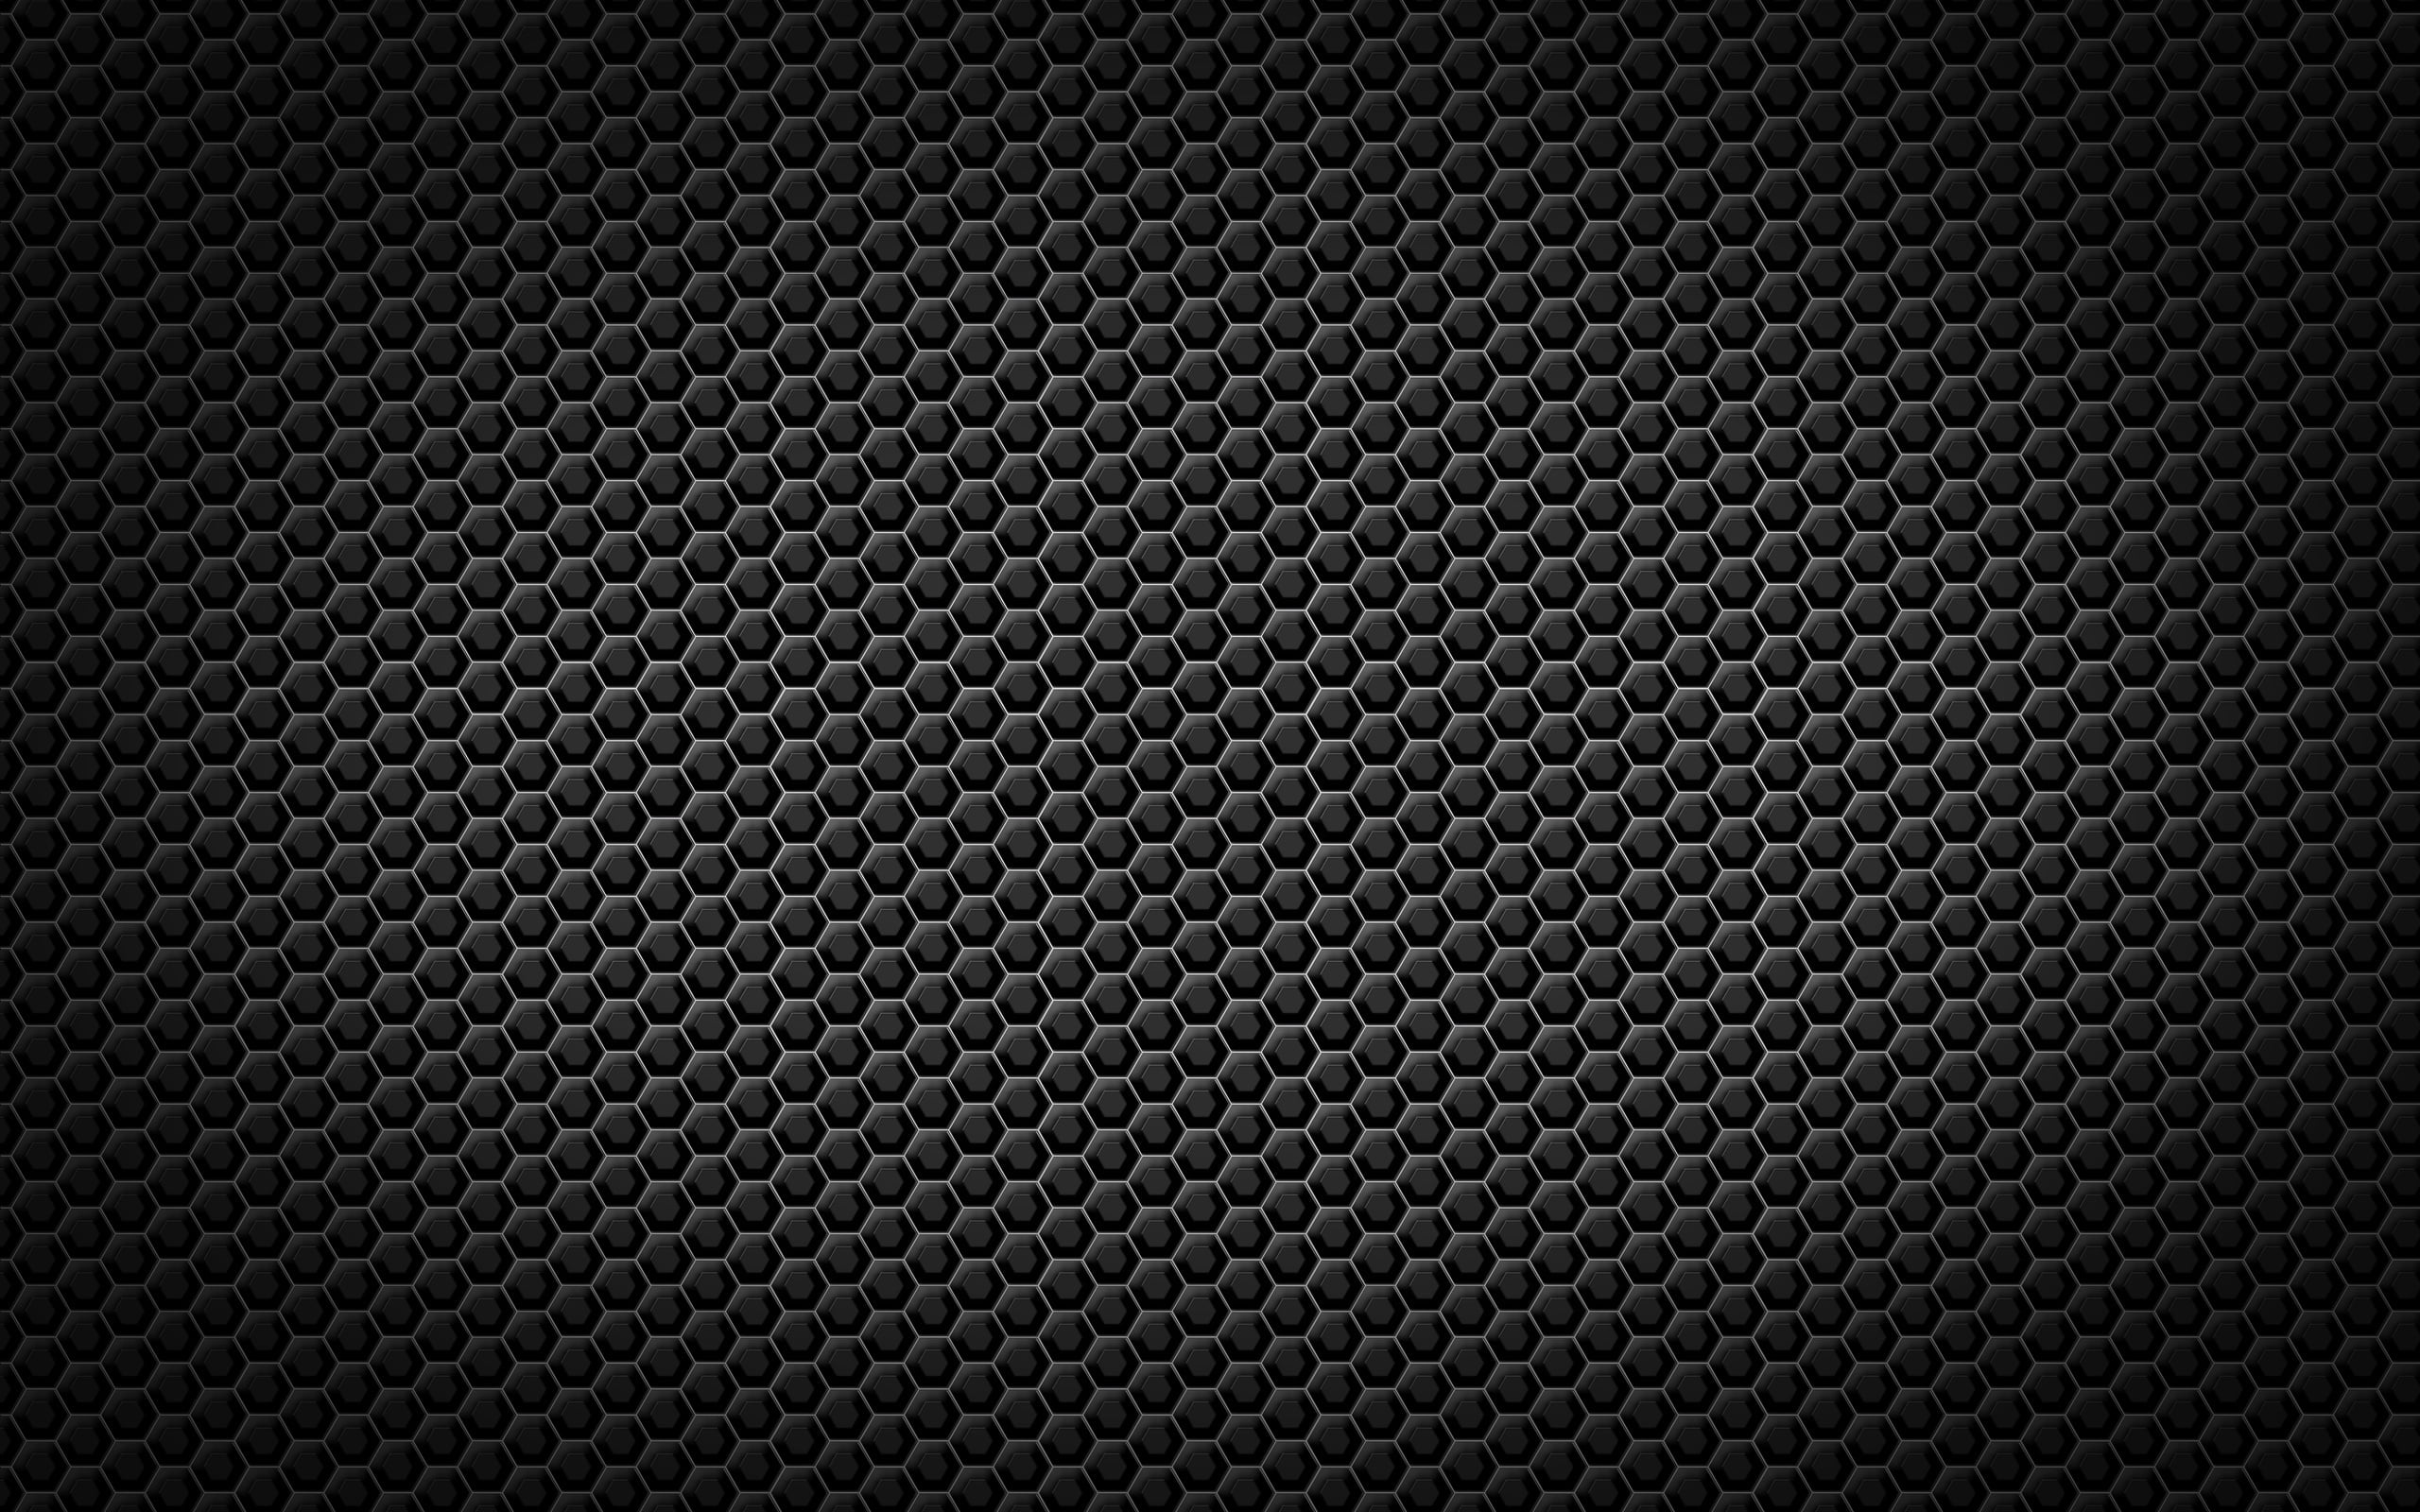 metal, black, cell, grille, texture, backgrounds, pattern, metallic